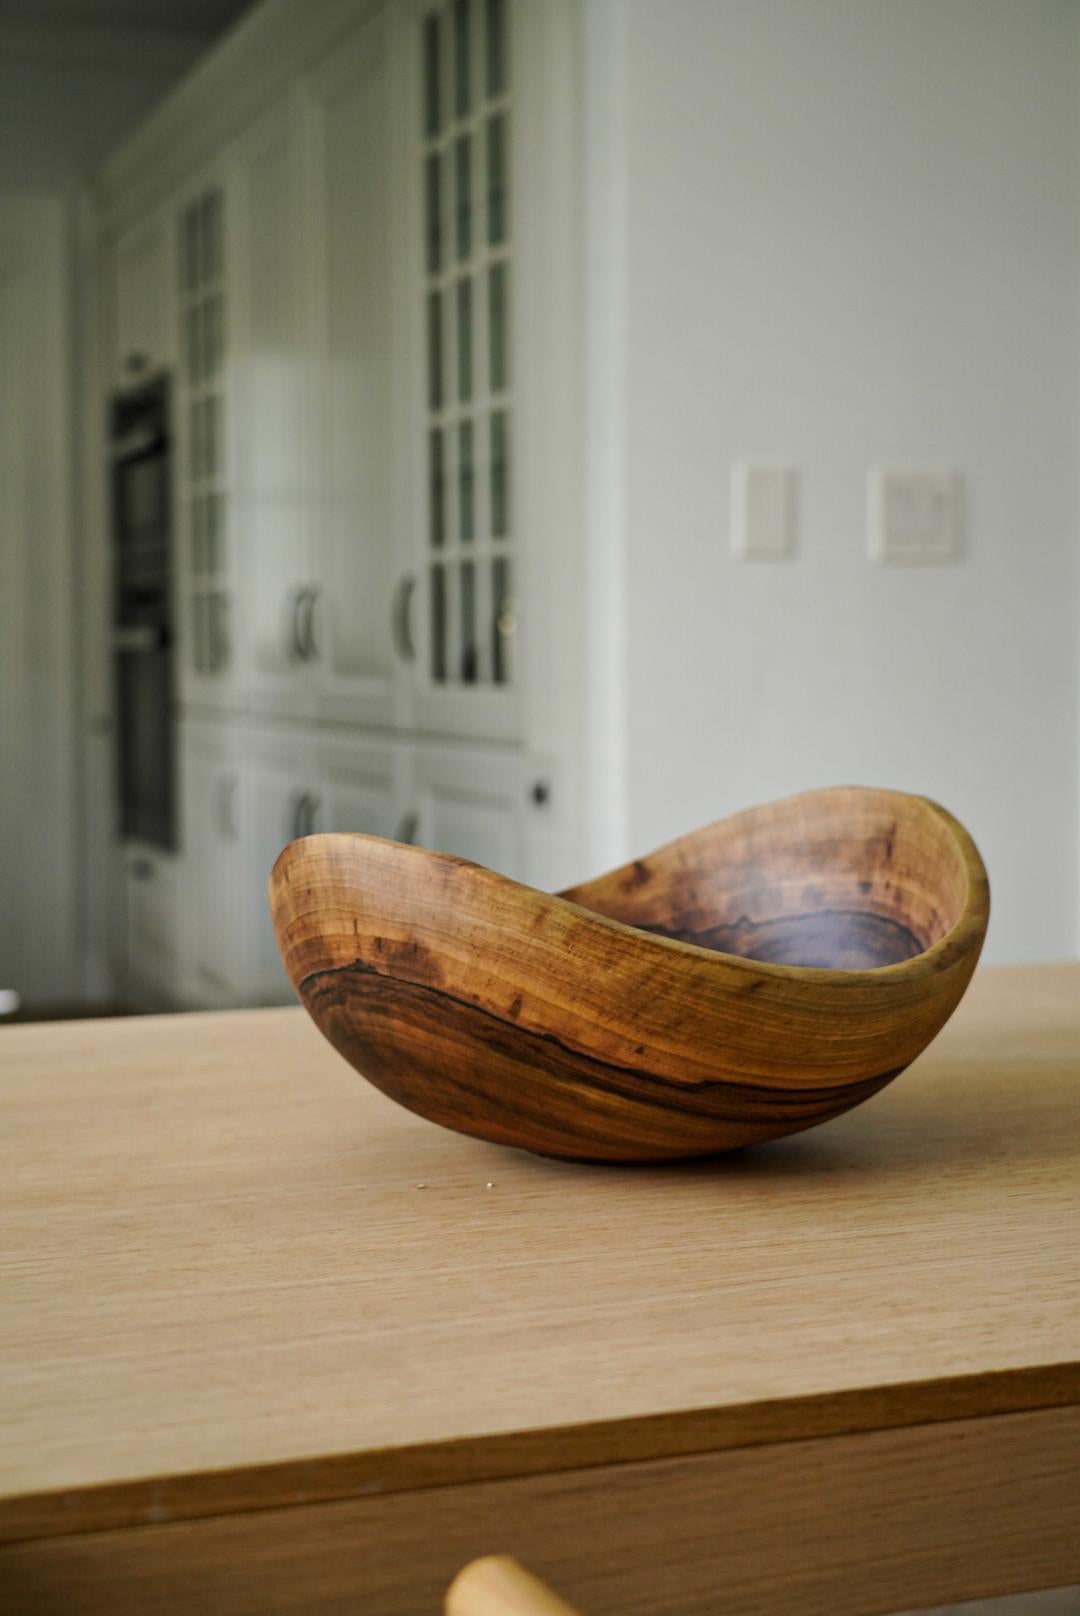 This large wood bowl will become a centerpiece on your table and a perfect vessel for all your fruits or vegetables in the kitchen. Hand-carved from one solid piece of walnut wood, the shape continues the wooden rings and puts the age and the beauty